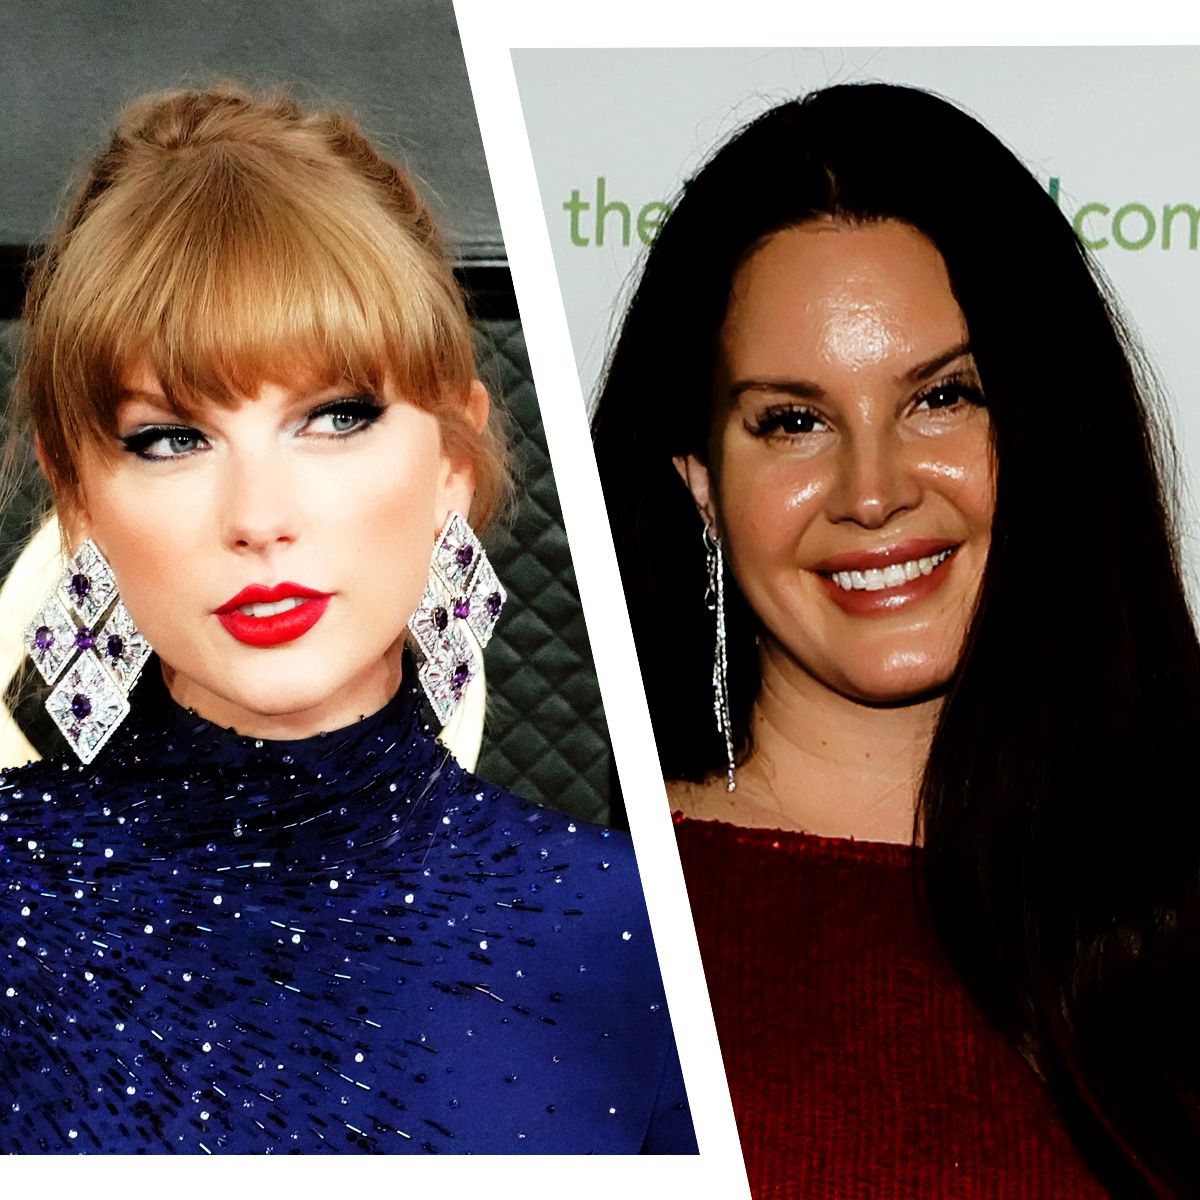 Lana Del Rey Would Have Sang More on Taylor Swift Collab